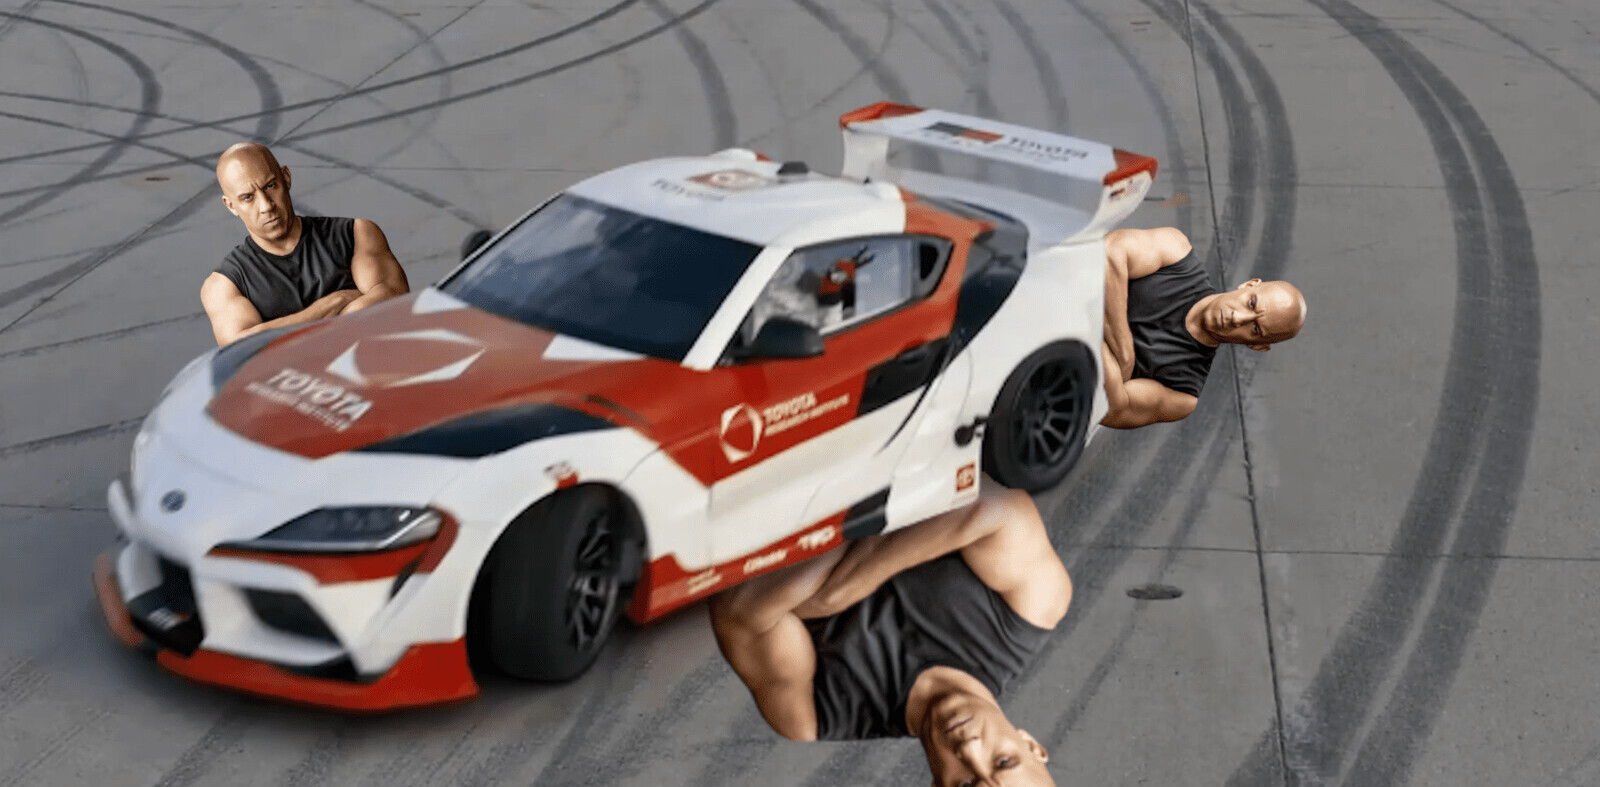 Watch Toyota’s self-drifting car put Vin Diesel out of a job